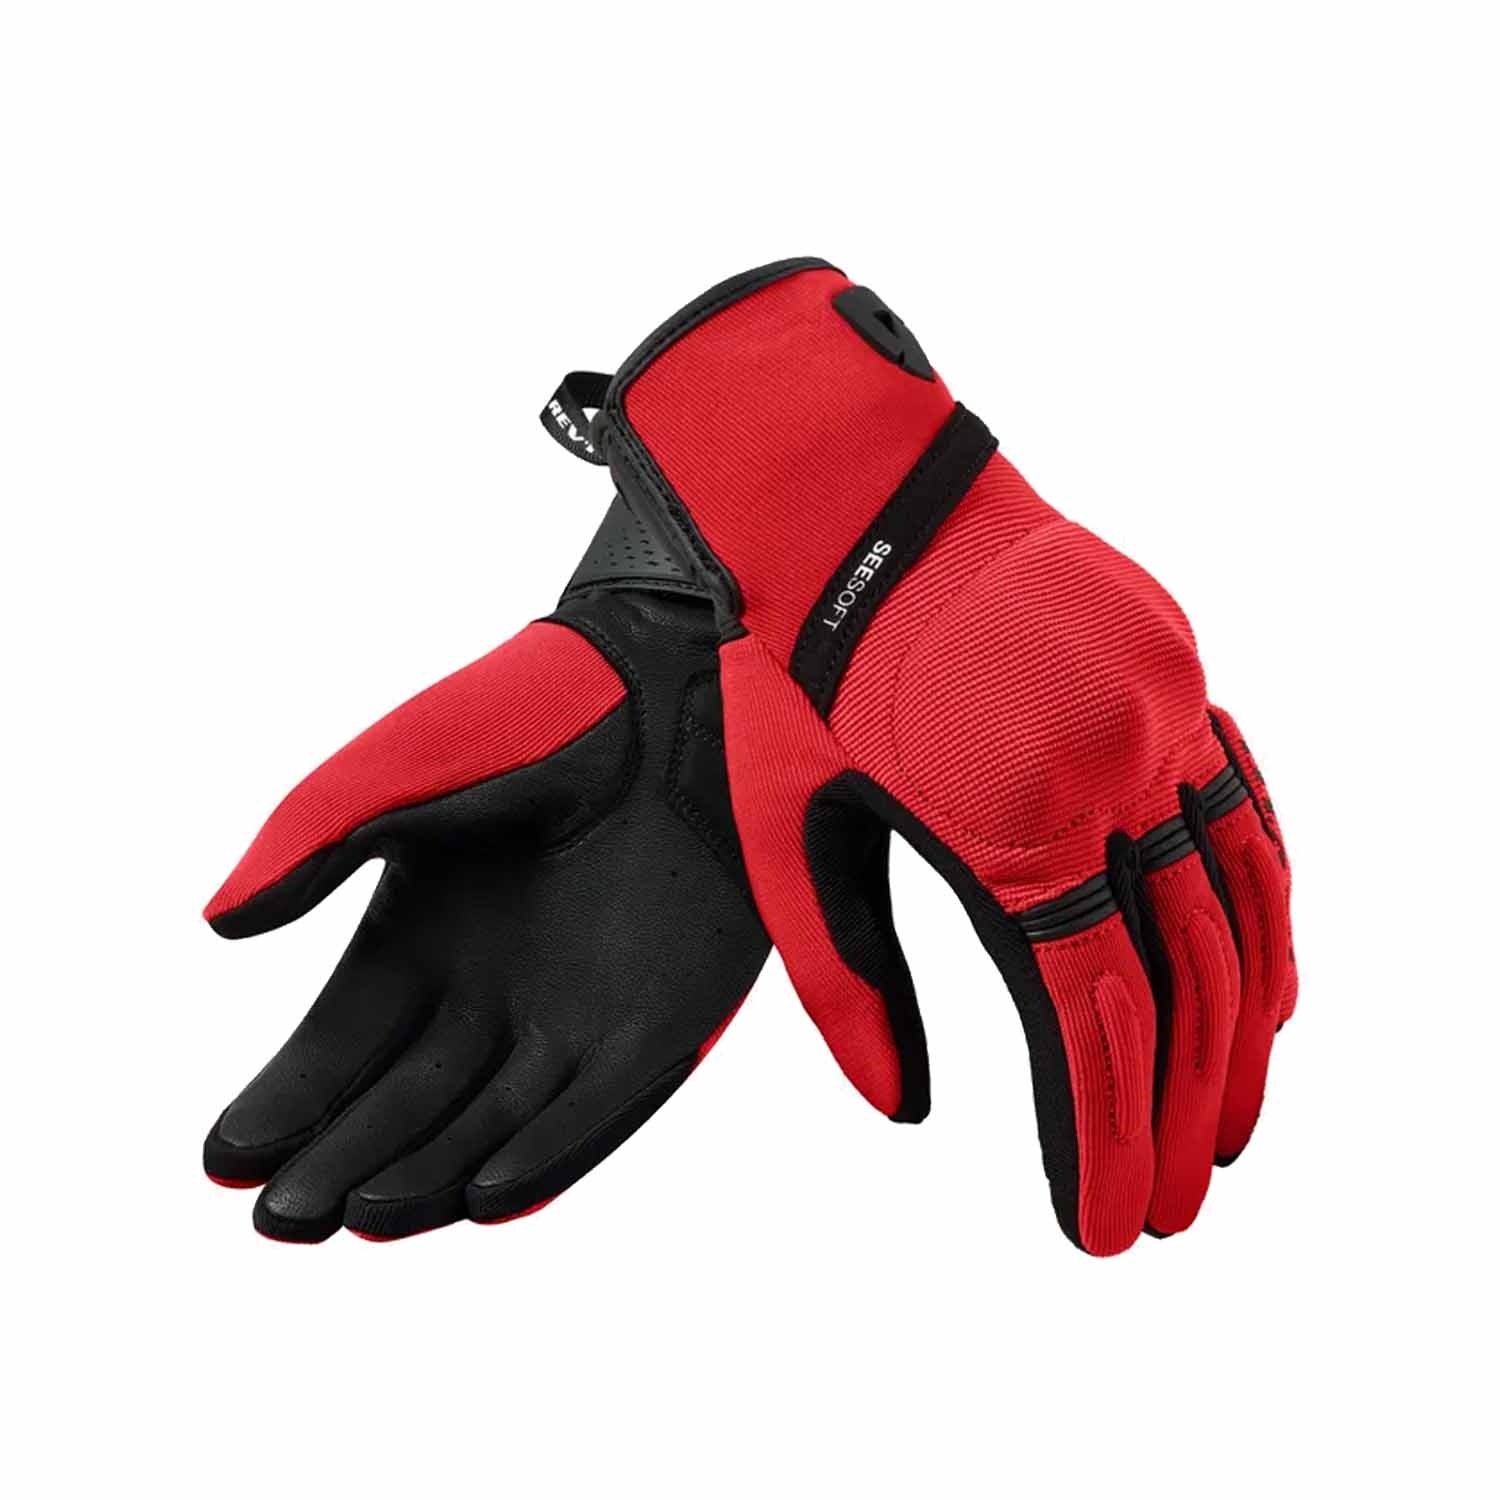 Image of REV'IT! Mosca 2 Ladies Gloves Red Black Talla S